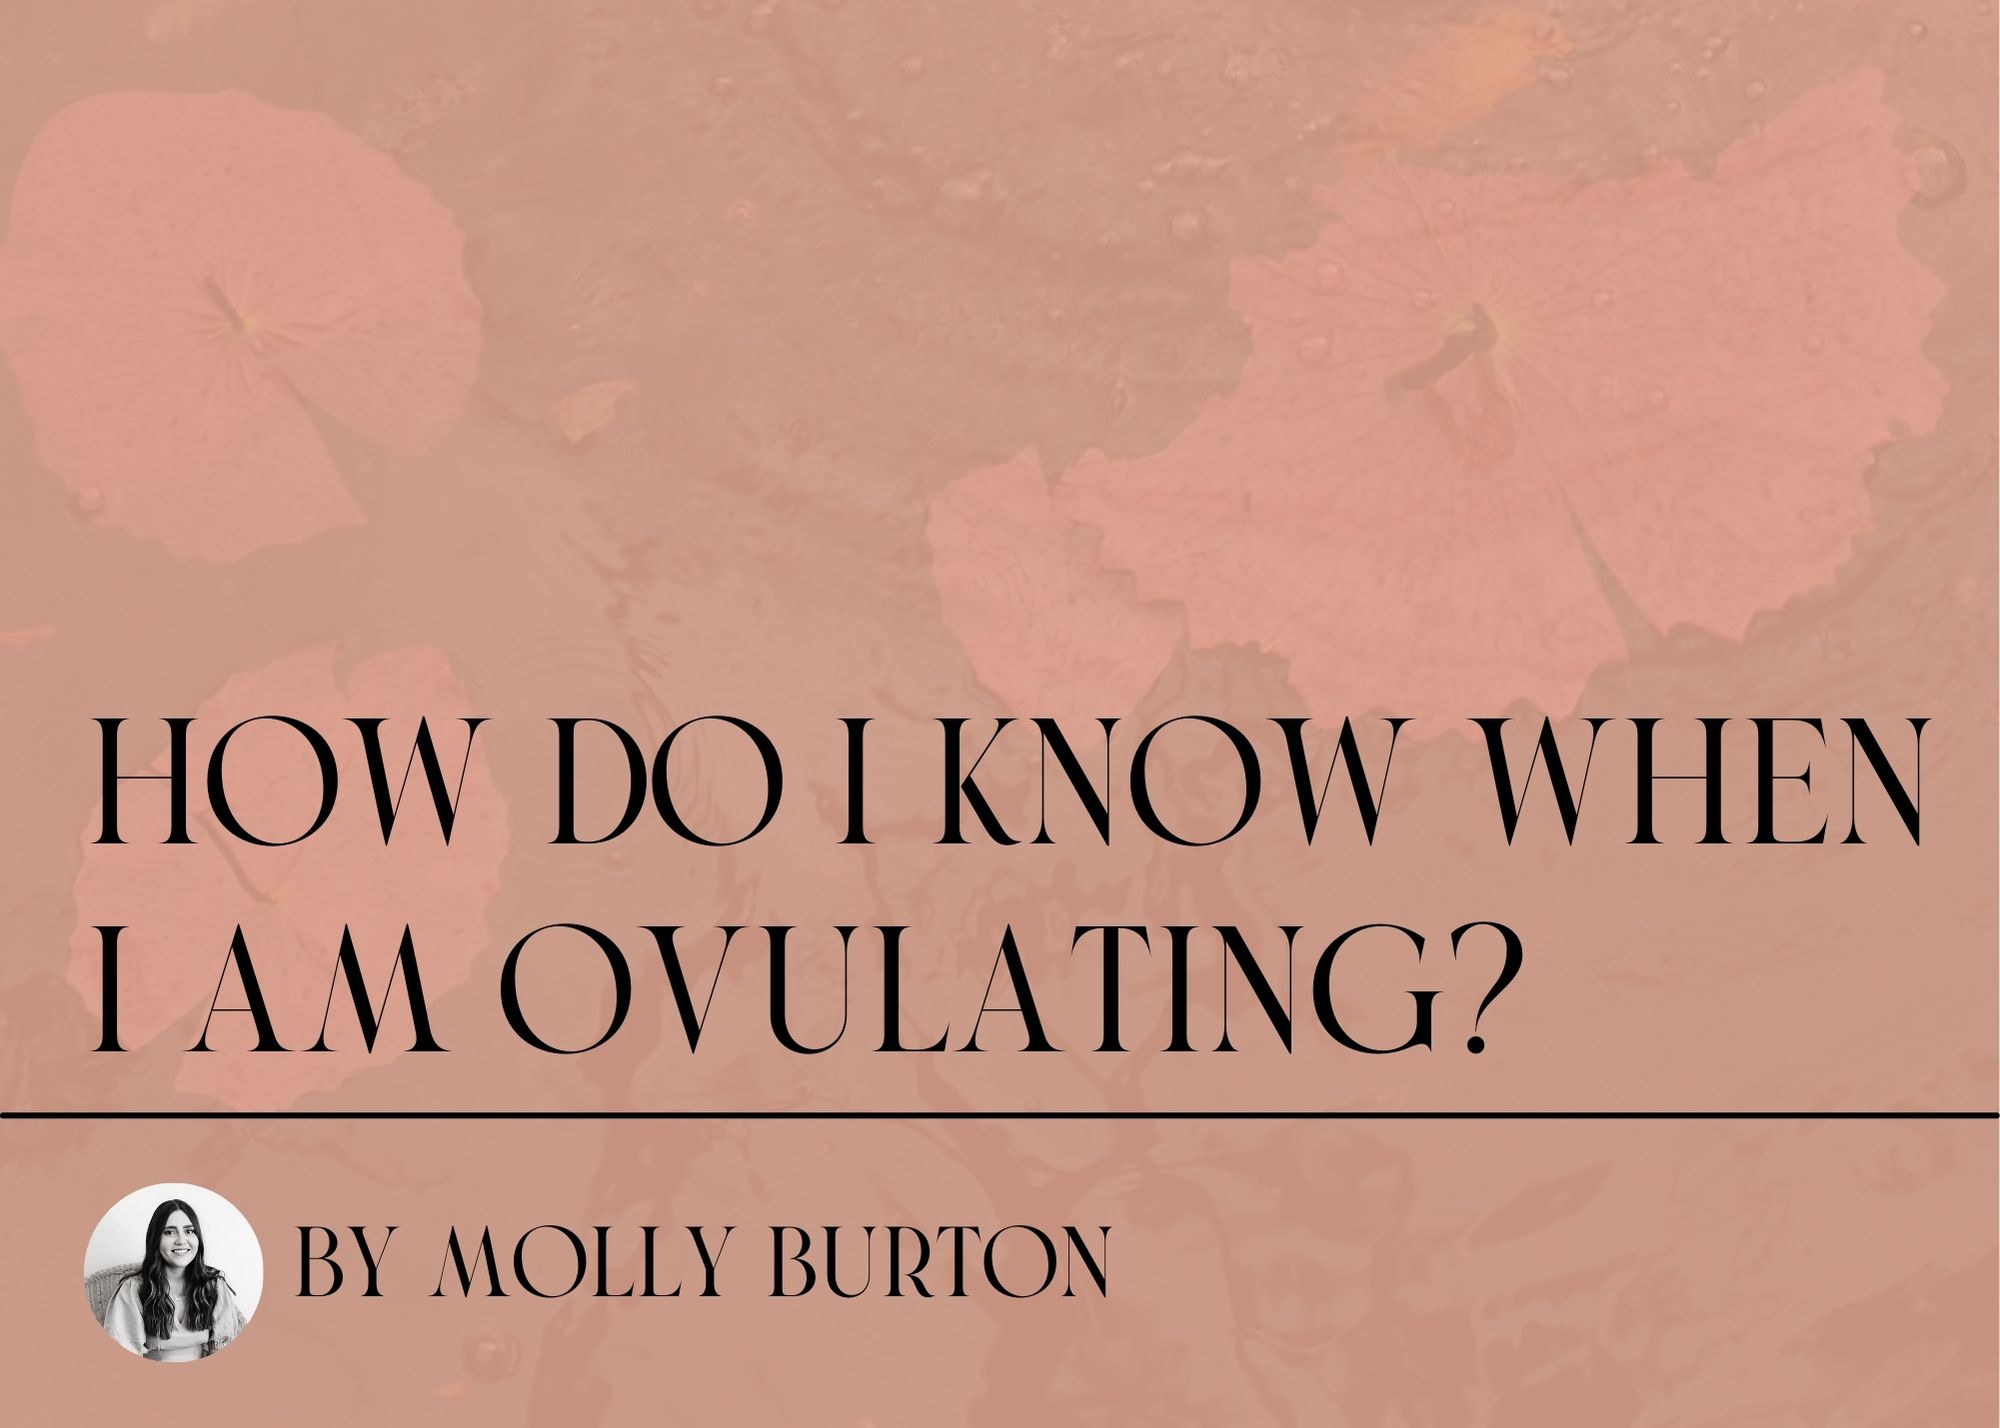 How do I know when I am ovulating?